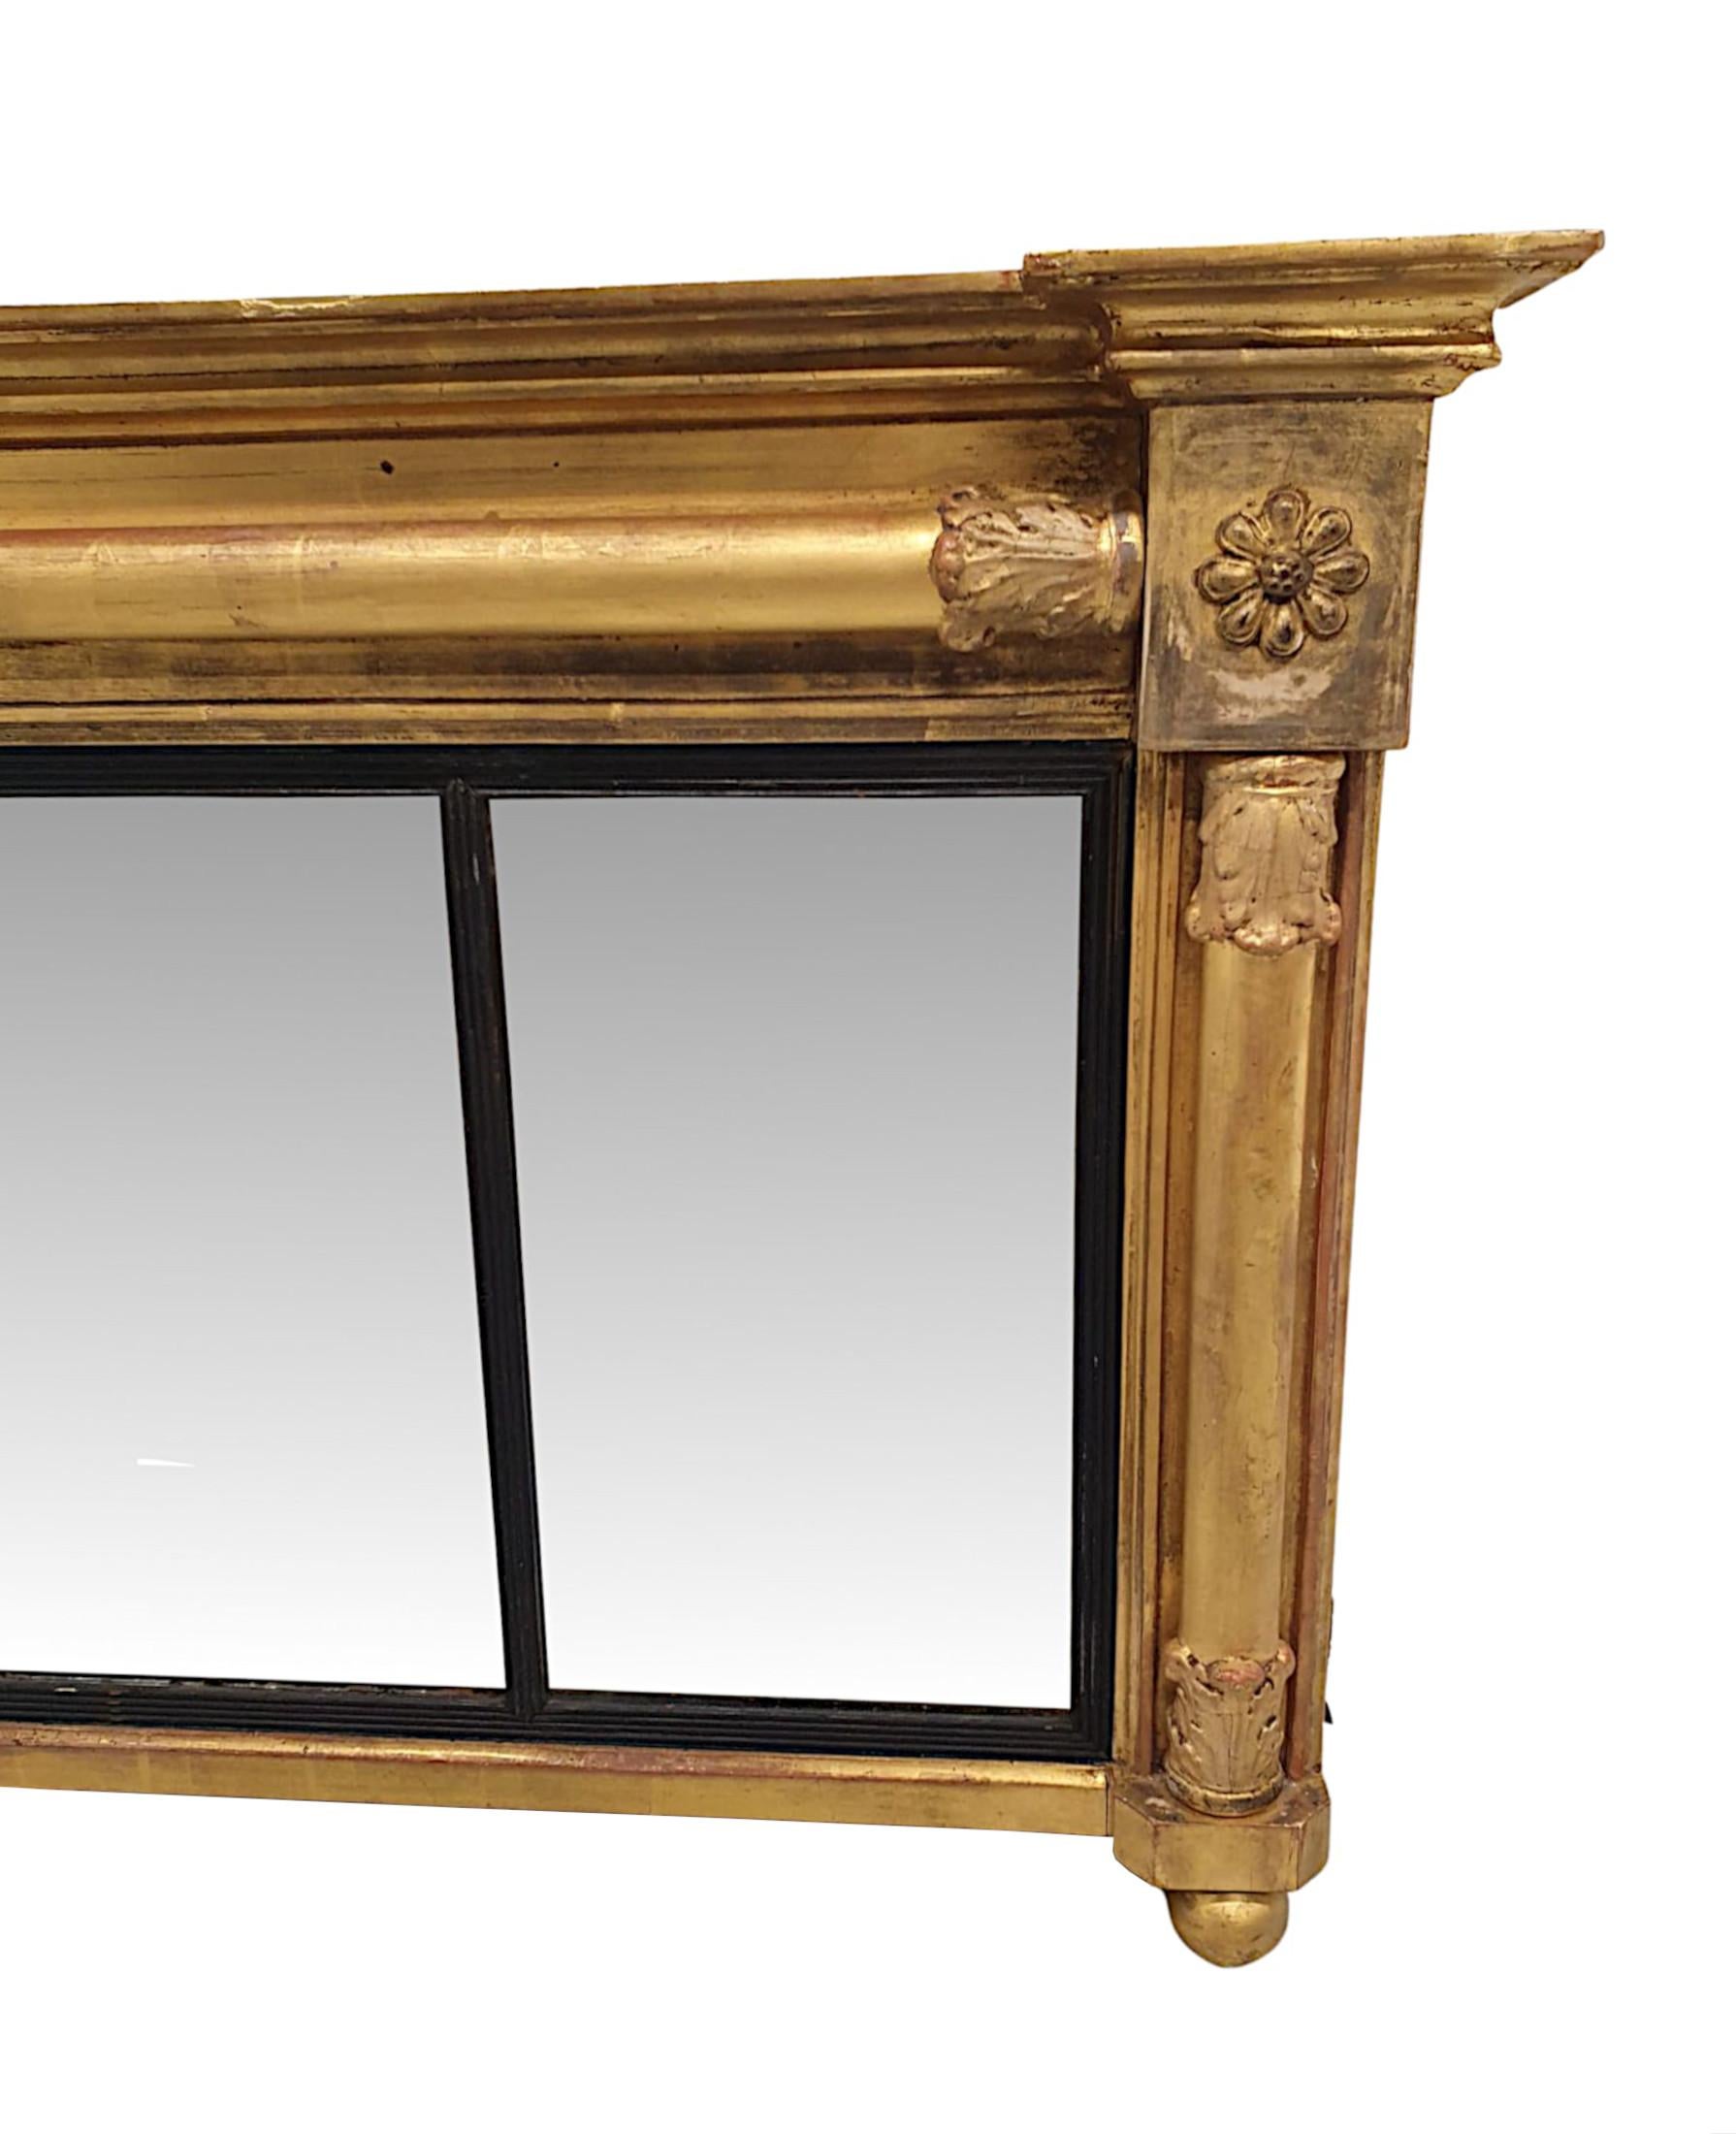 A fabulous and unusual early 19th Century William IV giltwood compartmental mirror, finely hand carved, of lovely quality and low and wide proportions.  The moulded and fluted giltwood frame is surmounted with an overhanging inverse breakfront